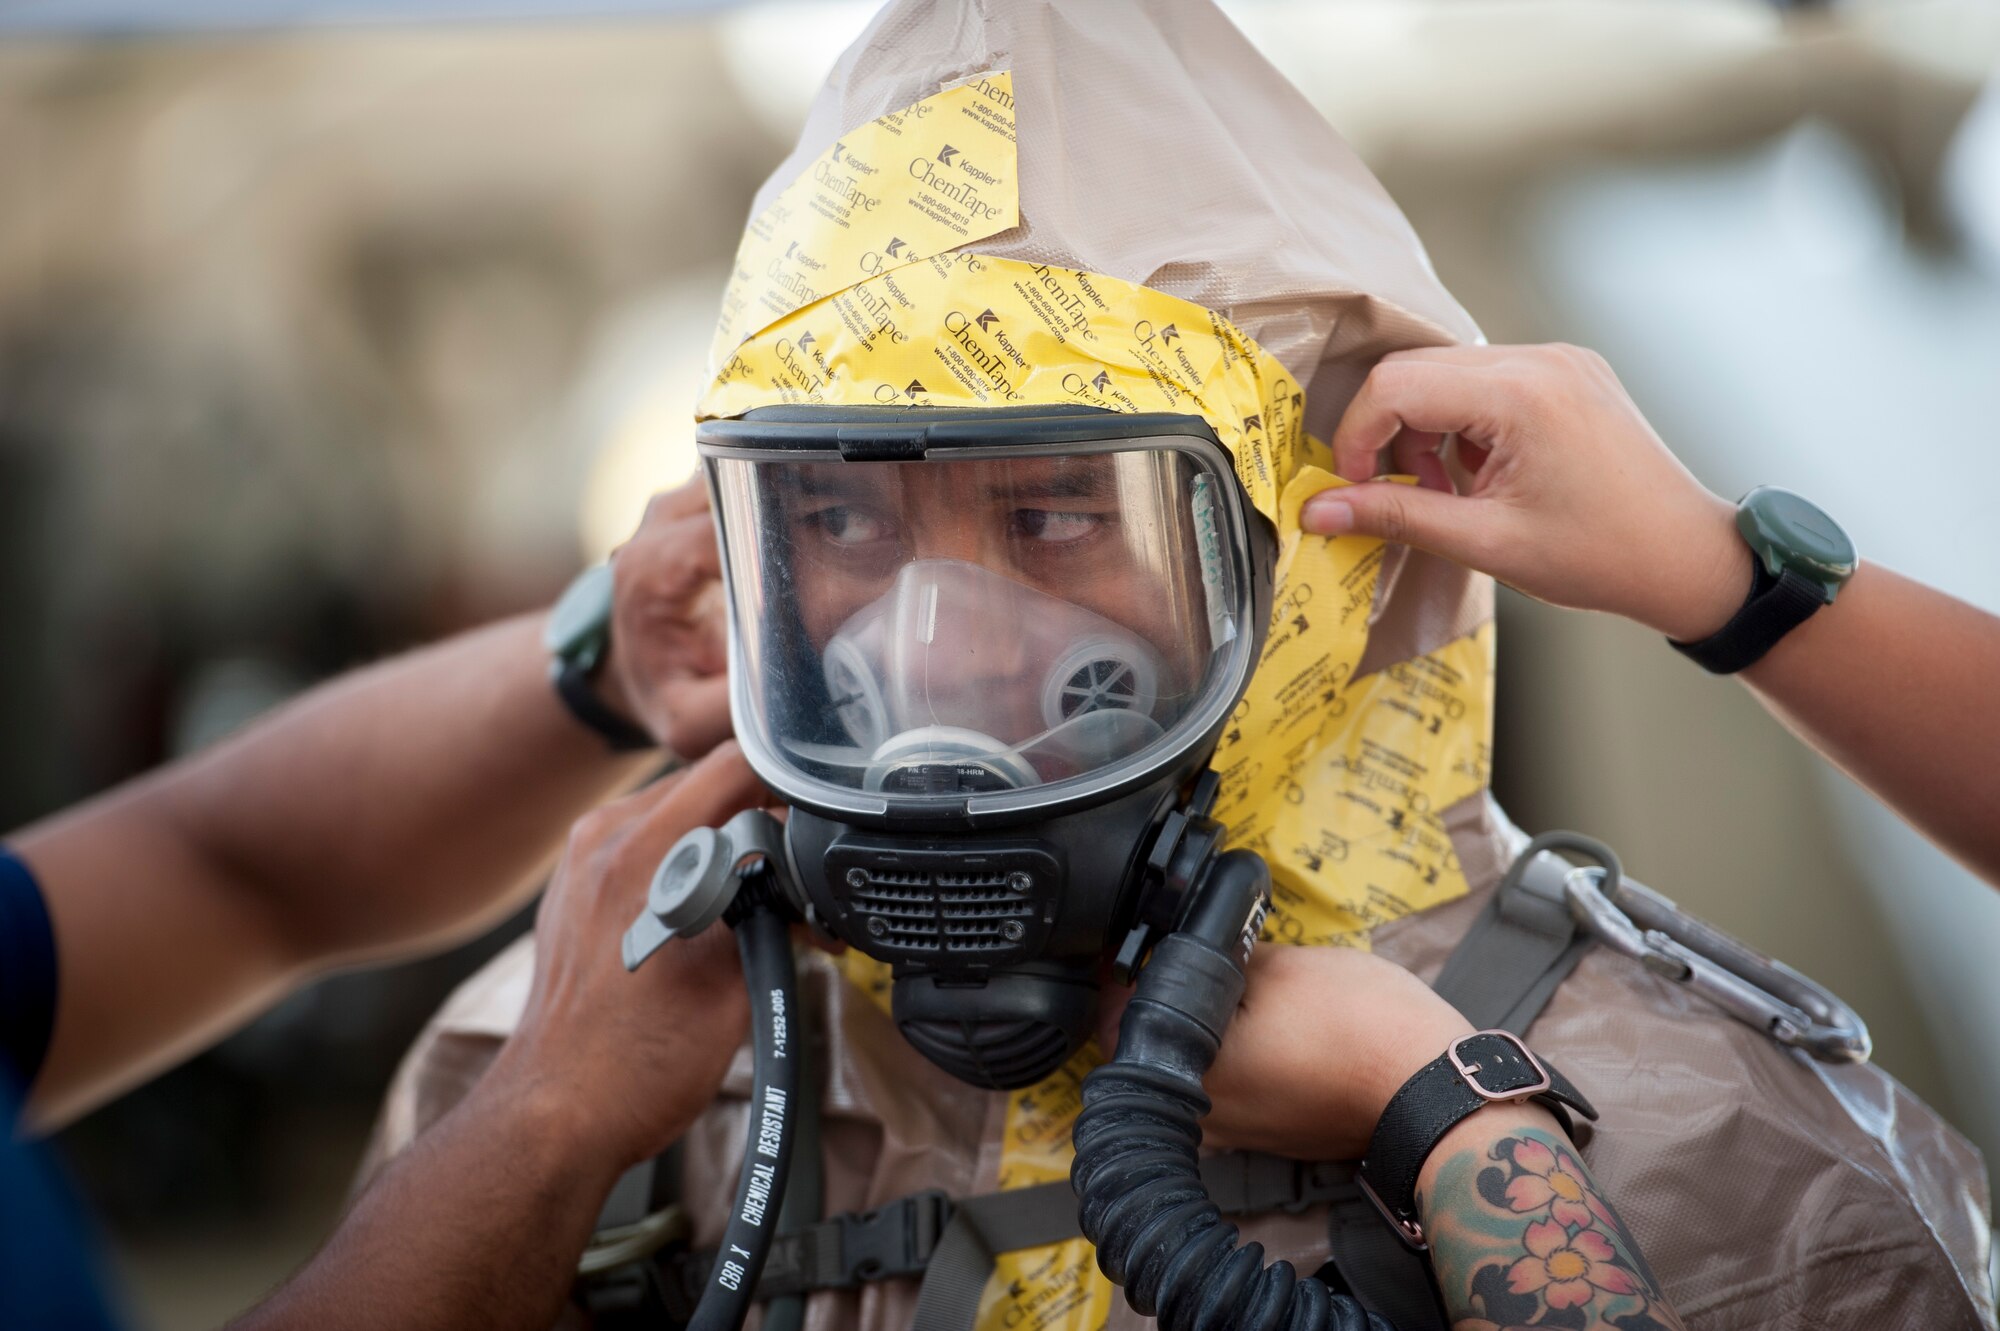 Staff Sgt. James Almero, 154th Medical Group Det. 1 all-hazards-triage-response team member, receives assistance in donning personal protective equipment prior to his rotation into the ‘Hot Zone’ March 9, 2019, at Kalaeloa, Hawaii.